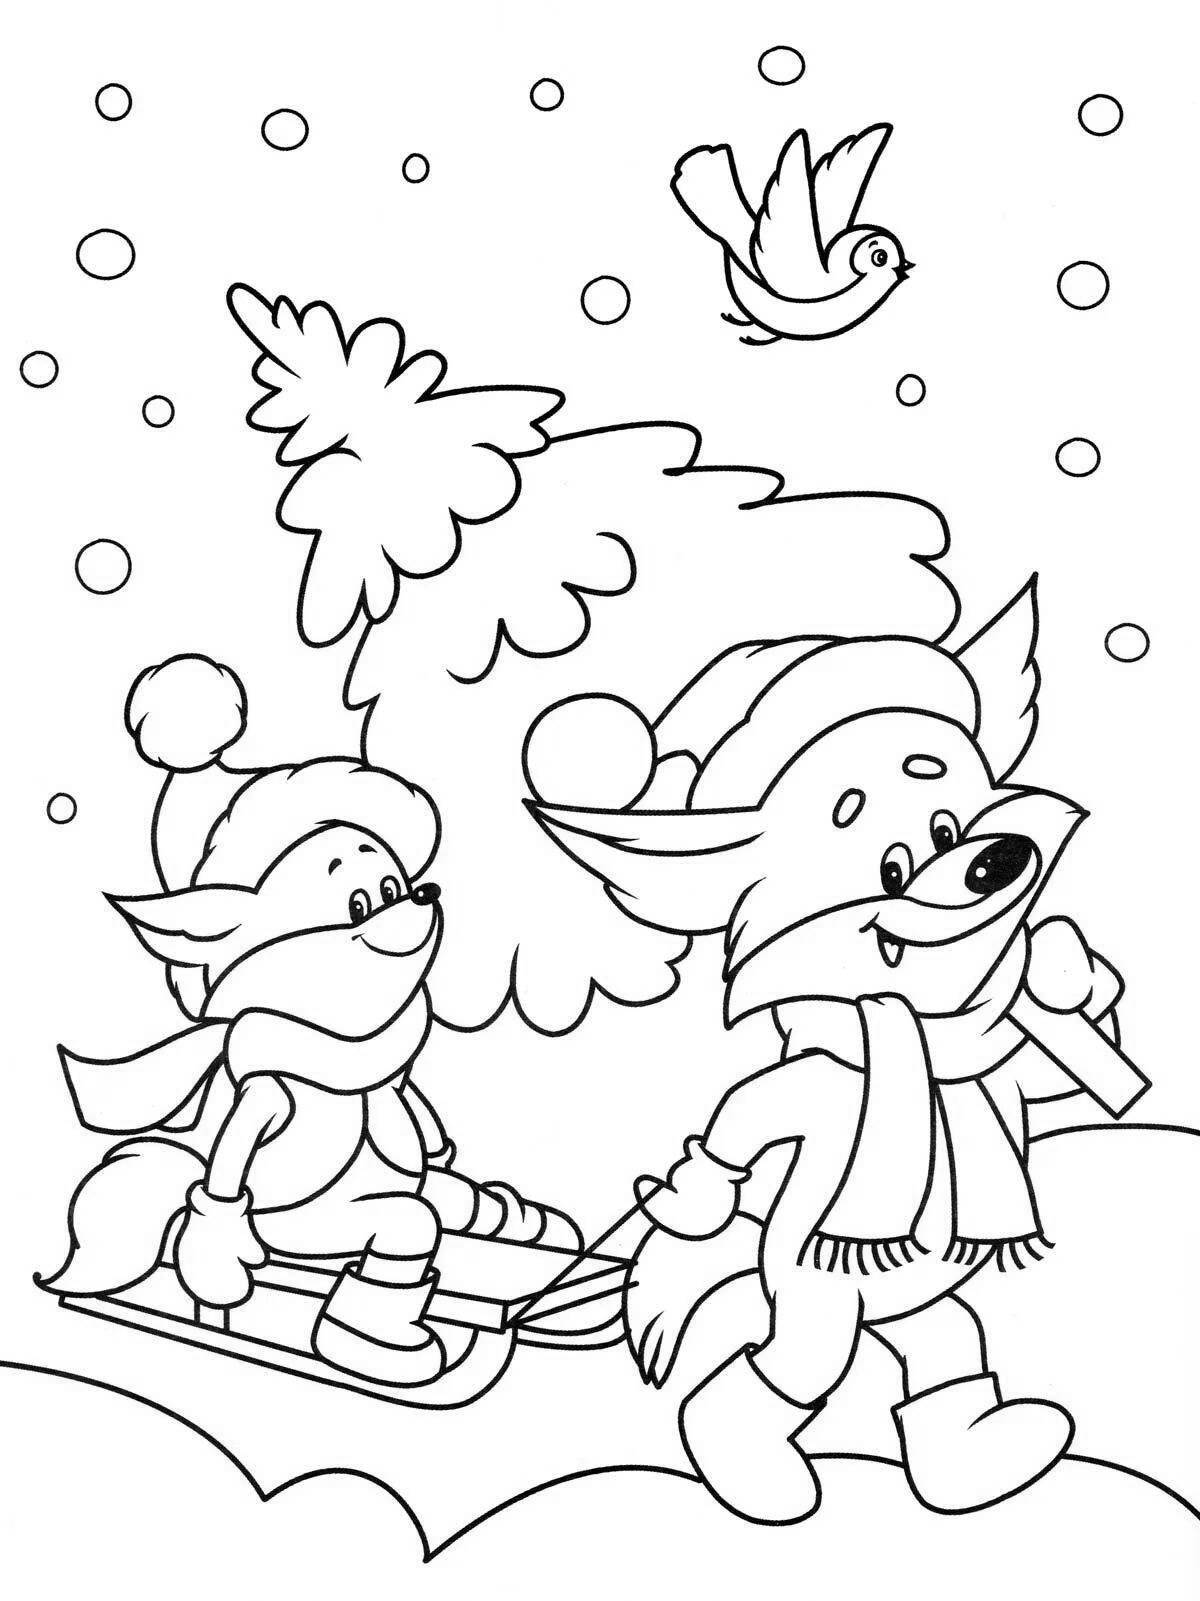 Exquisite winter coloring book for 4 year olds